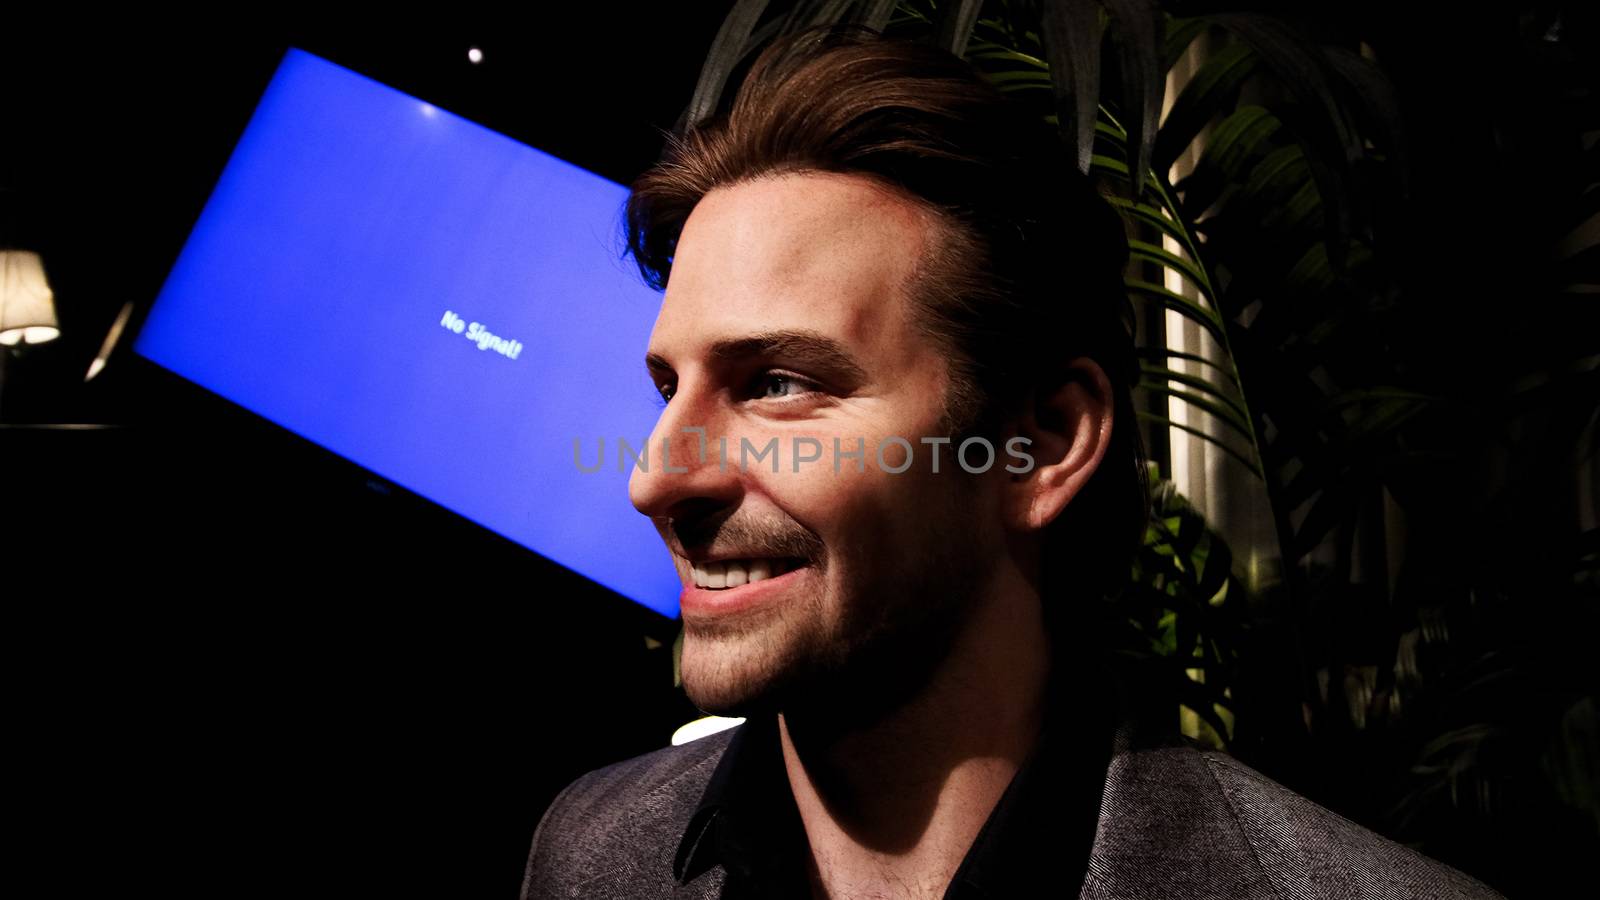 LAS VEGAS NV - Oct 09 2017: Bradley Charles Cooper wax figure with movie set from HANGOVER movie at Madame Tussauds museum in Las Vegas.